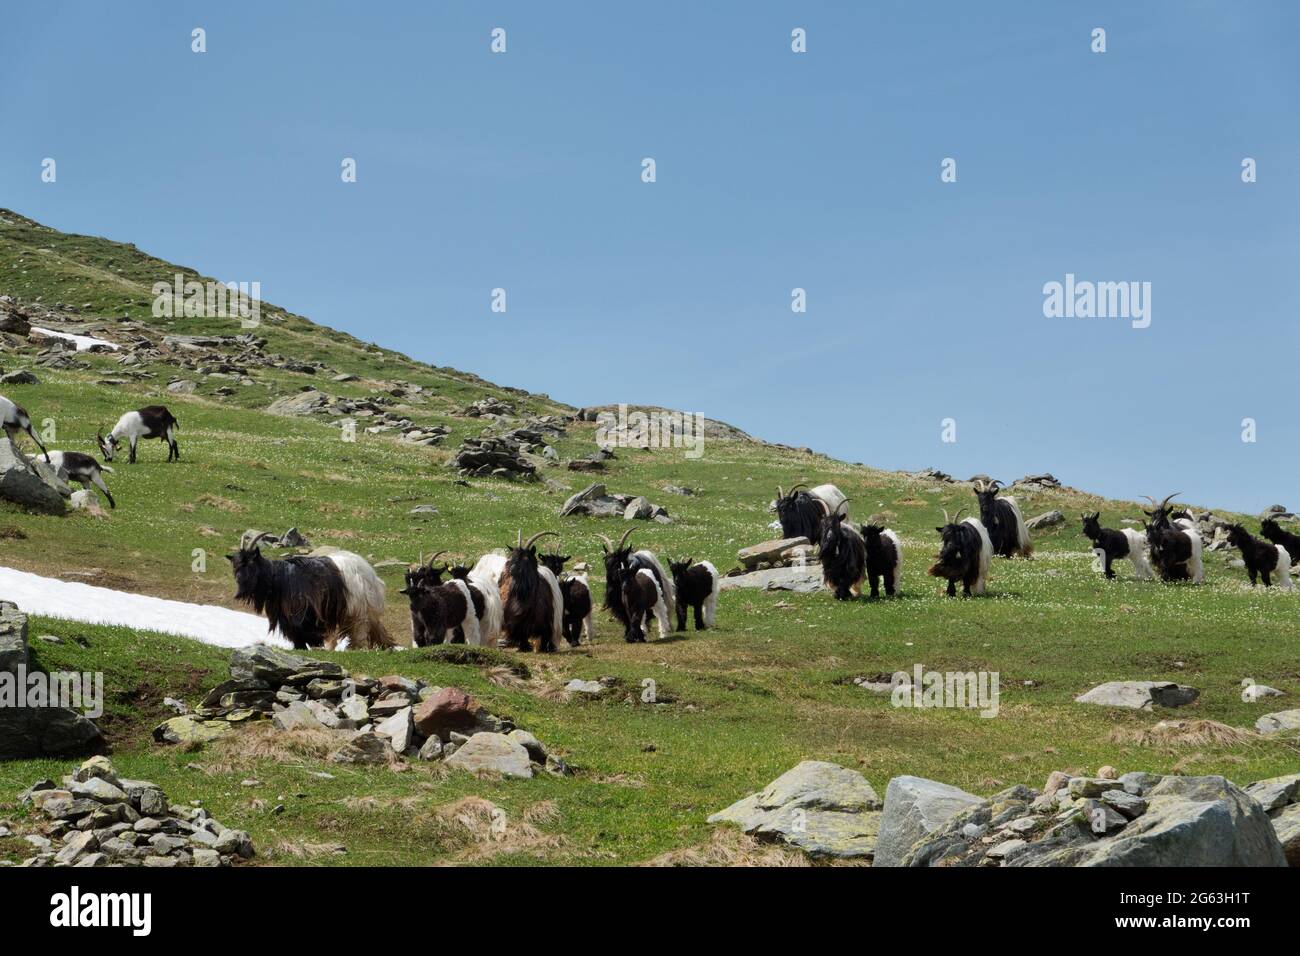 Herd of Valais Blackneck goats in an alpine meadow Stock Photo